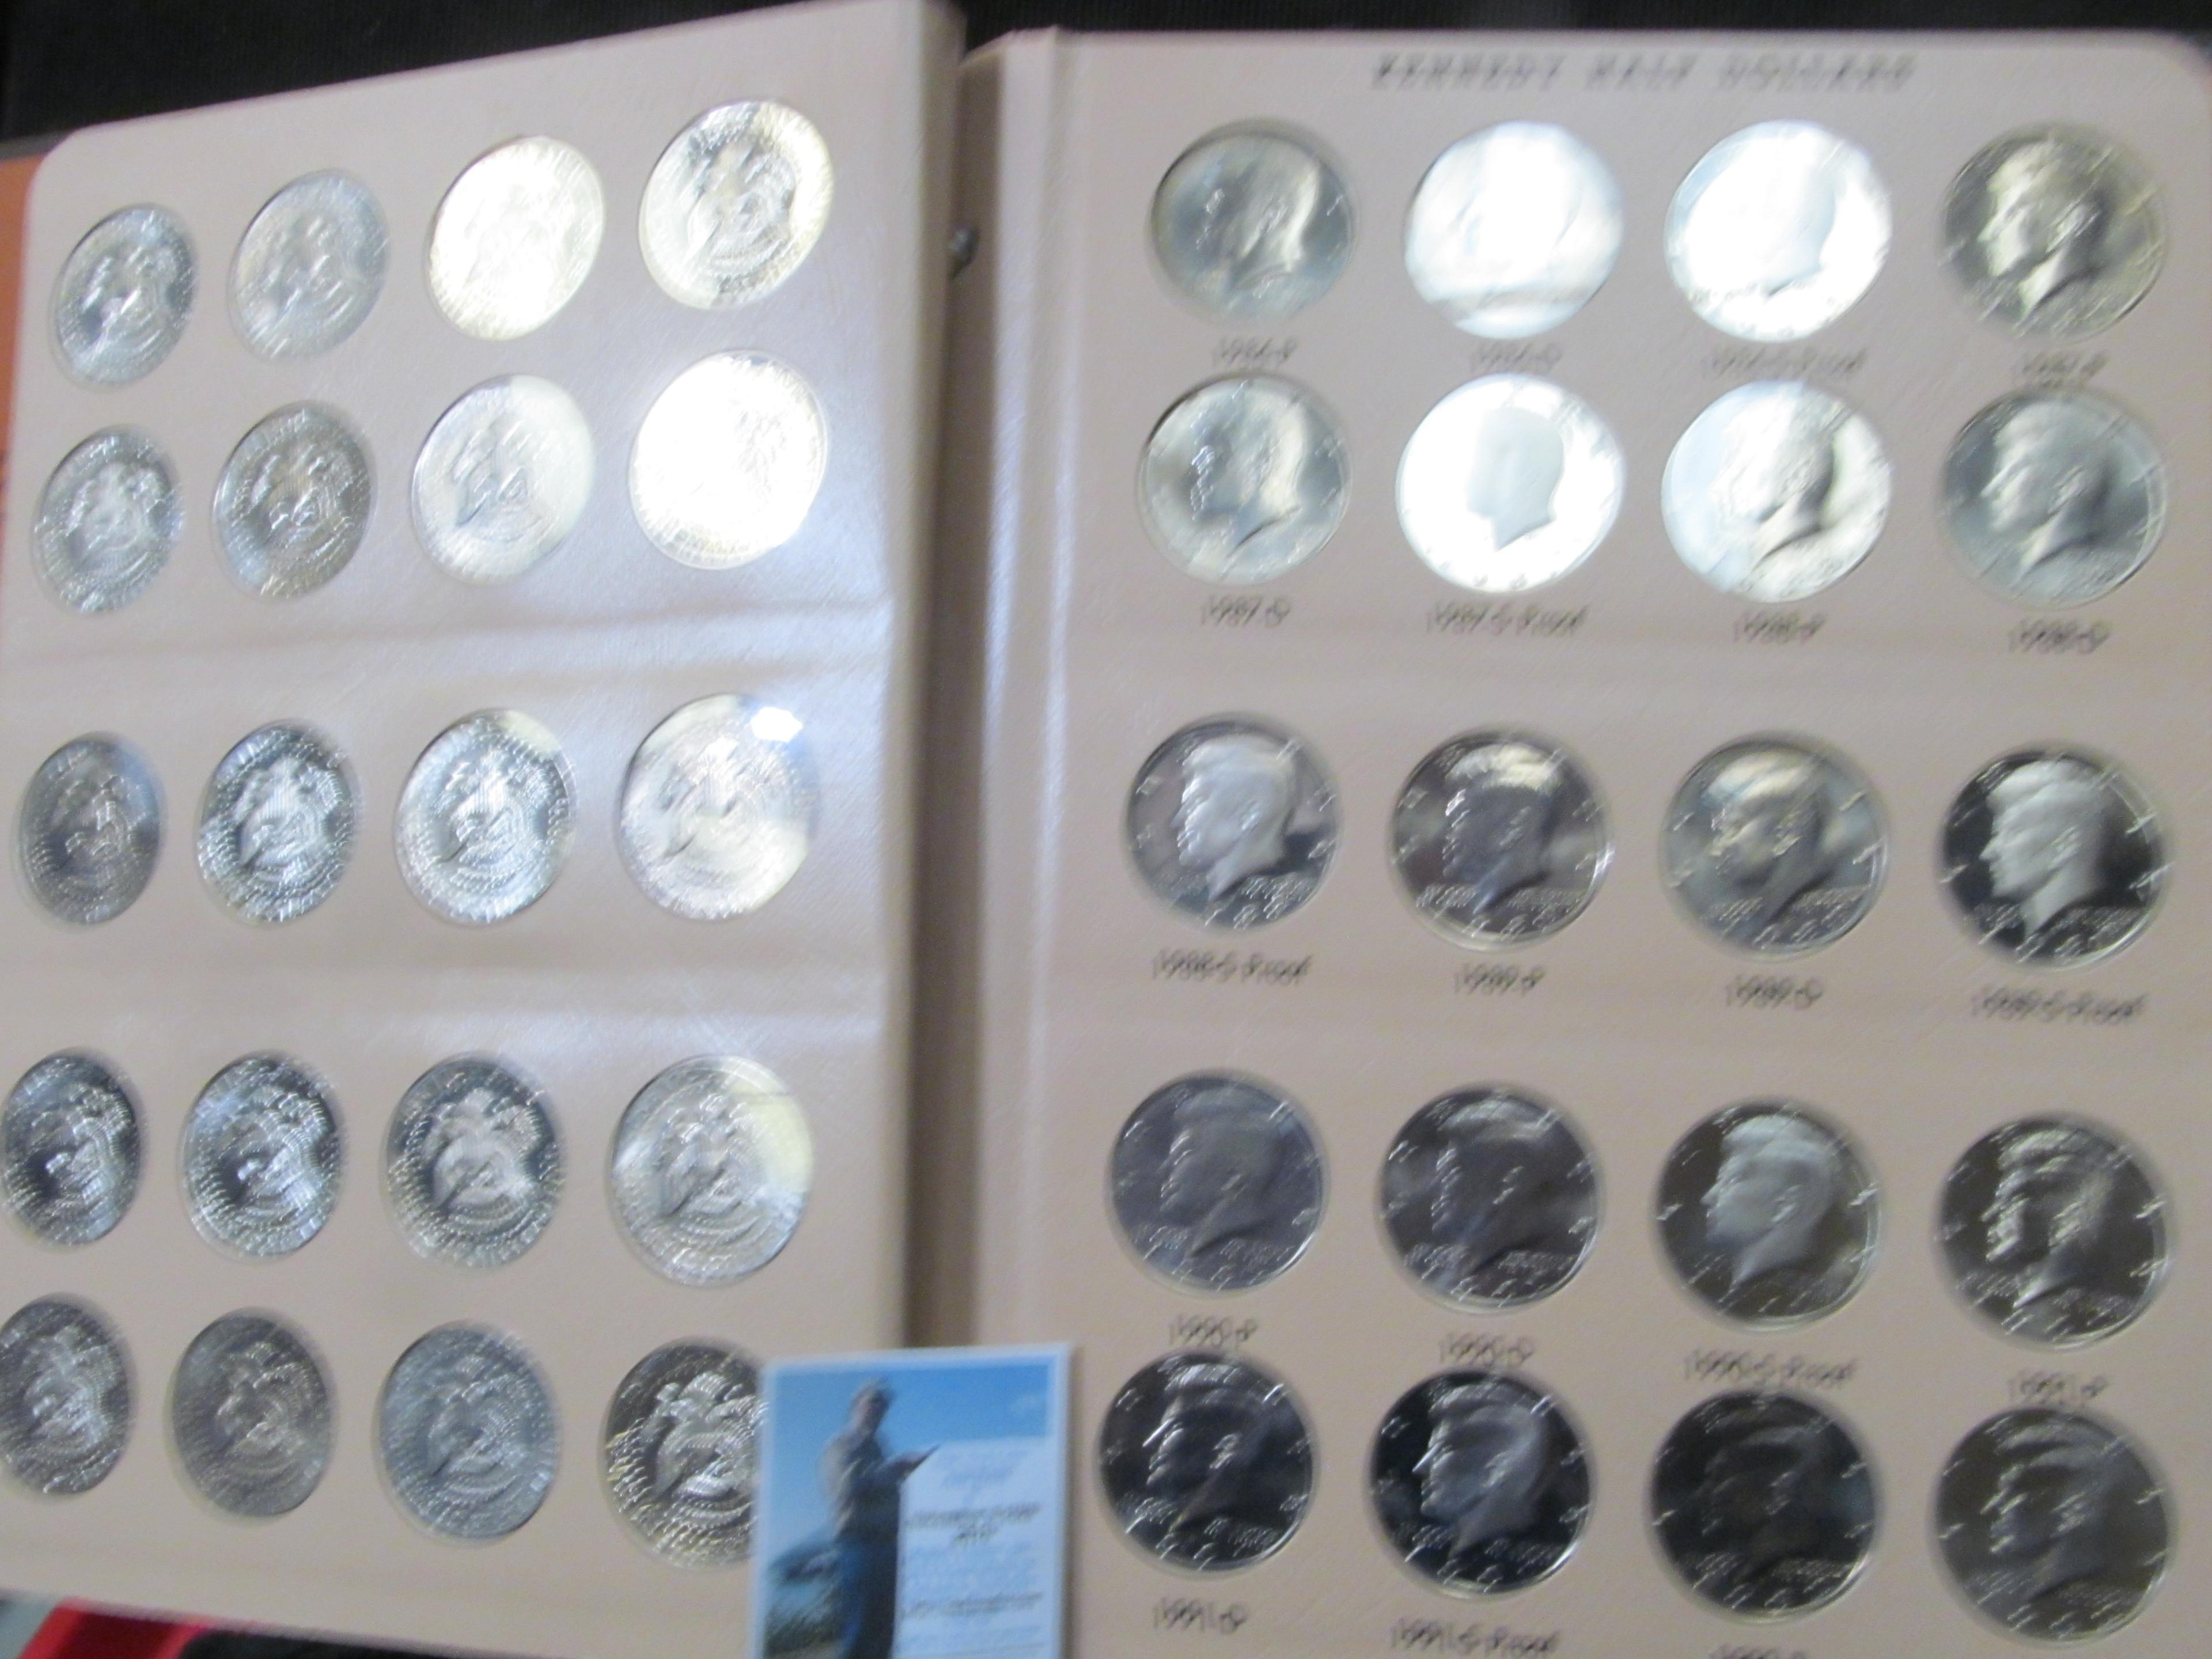 "Kennedy Half Dollars Including Proof Issues" Album with complete set of Halves including Silver Pro